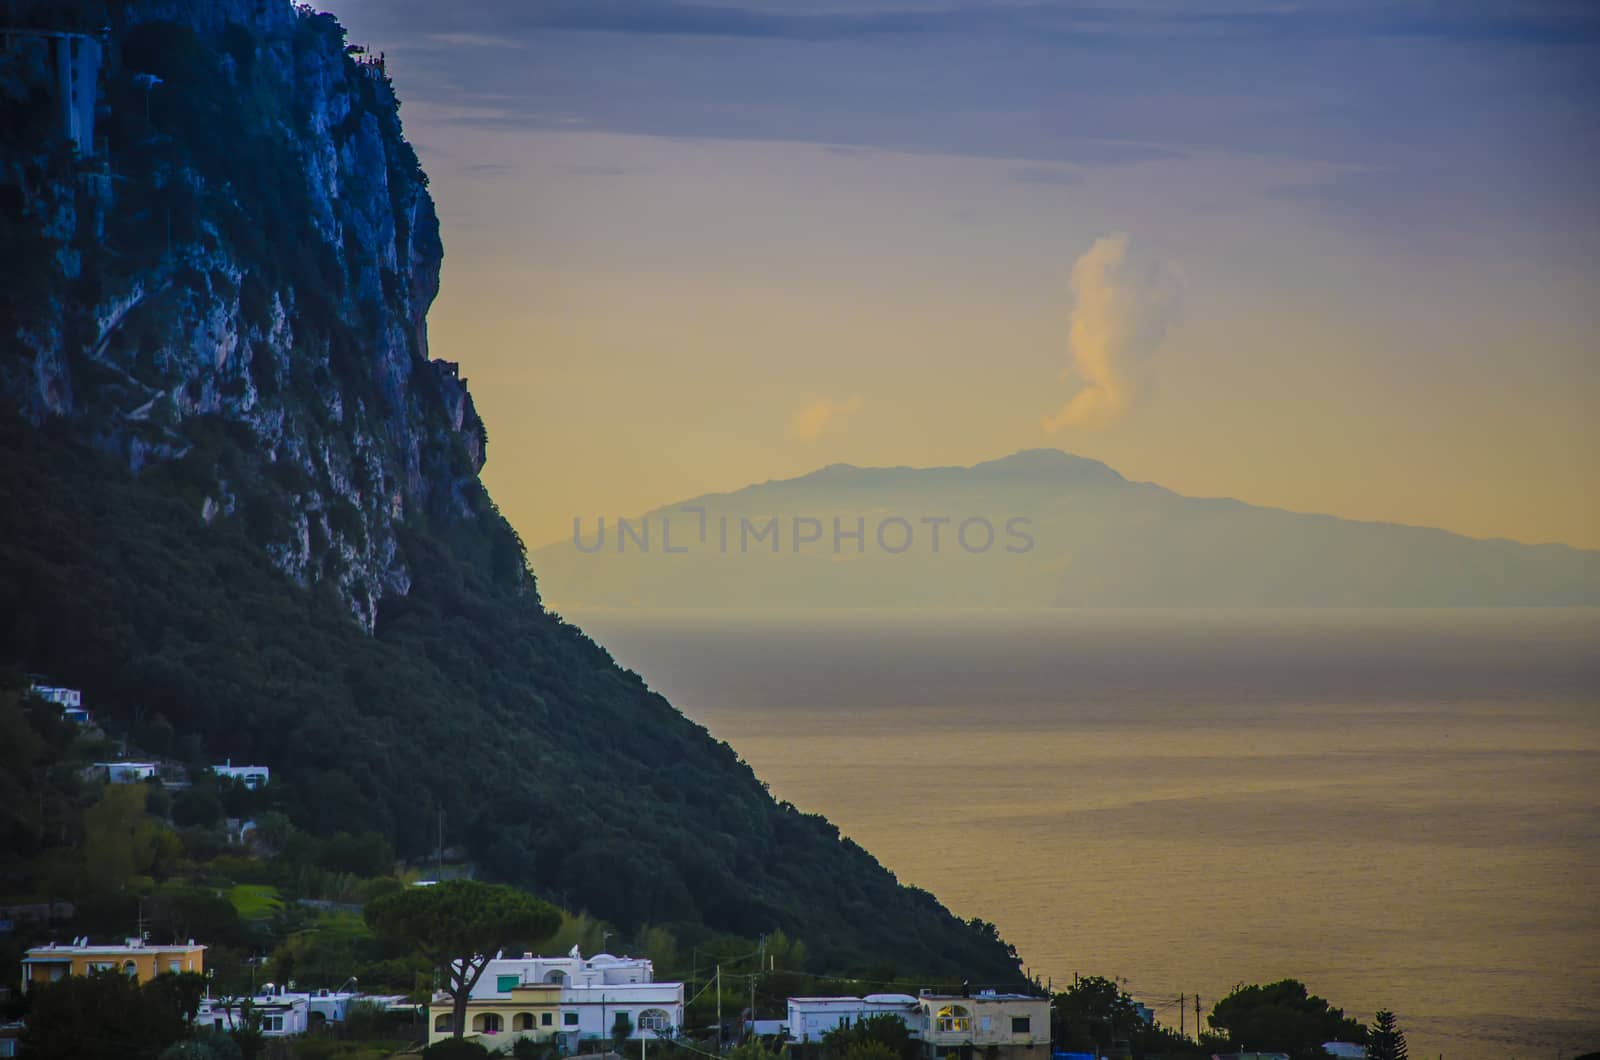 From the coast of capri you can see Vesuvius in the bay of Naples with some fumaroles